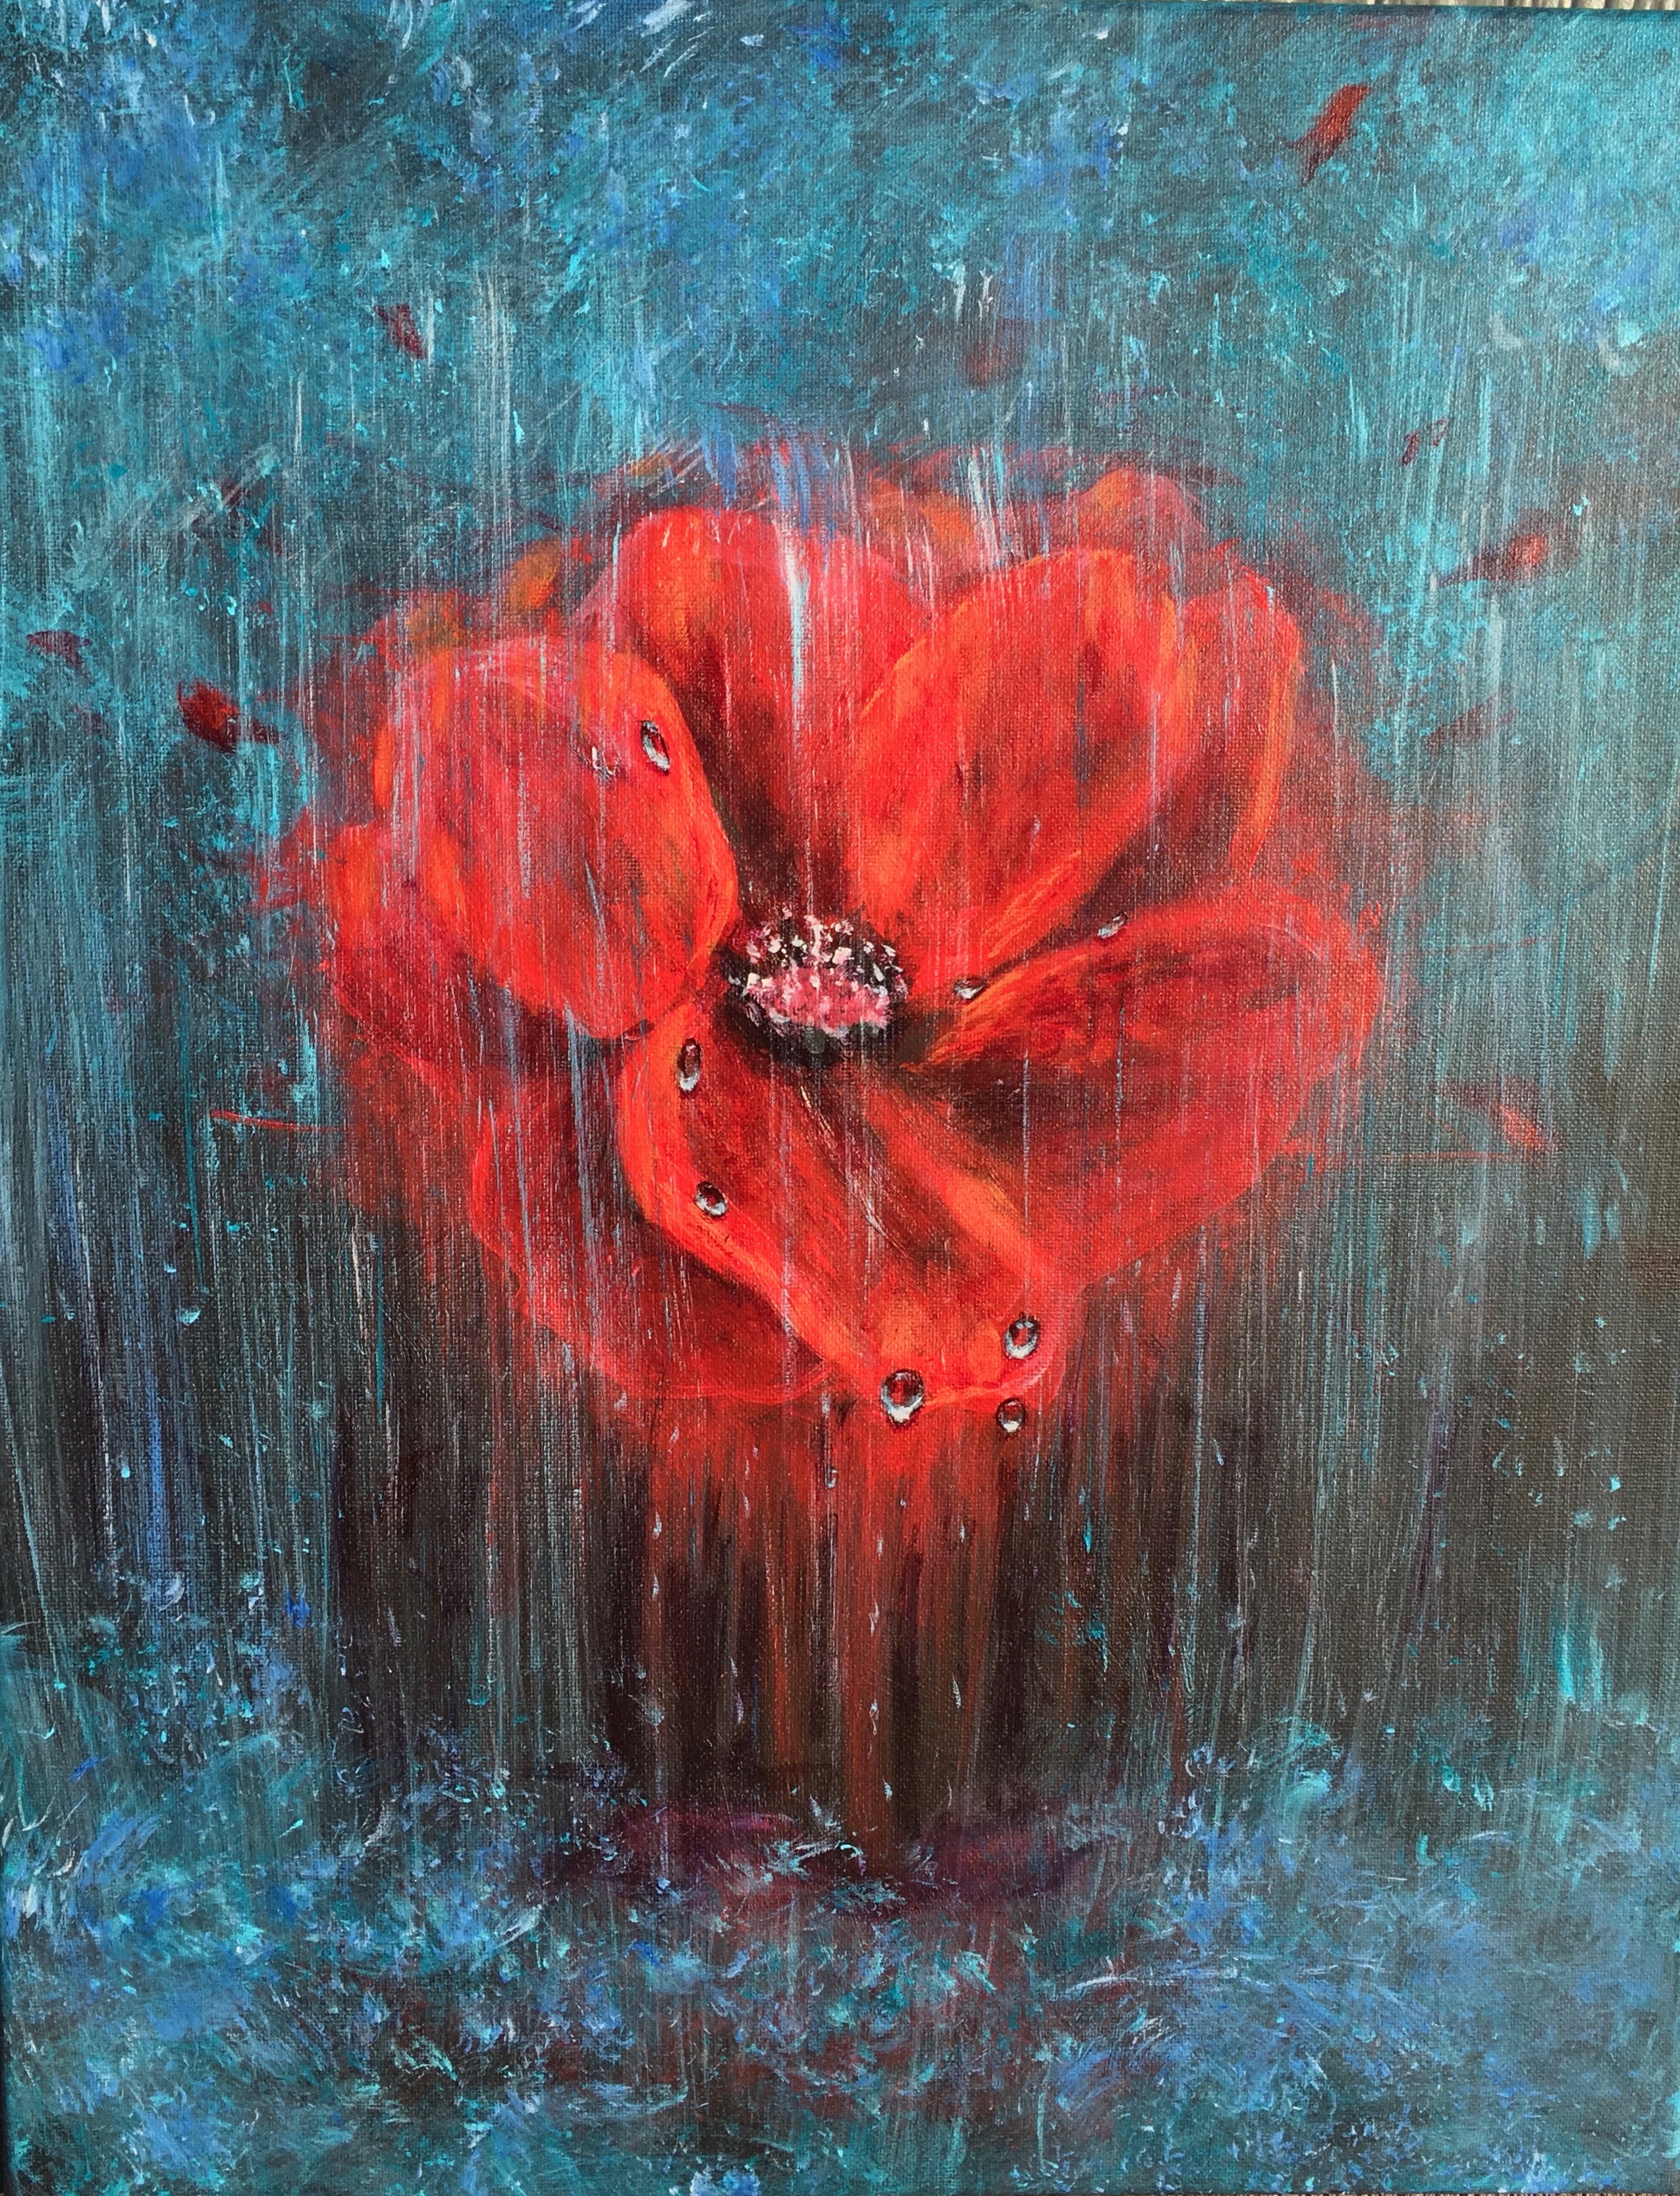 painting by the author of a red flower against a blurry blue background